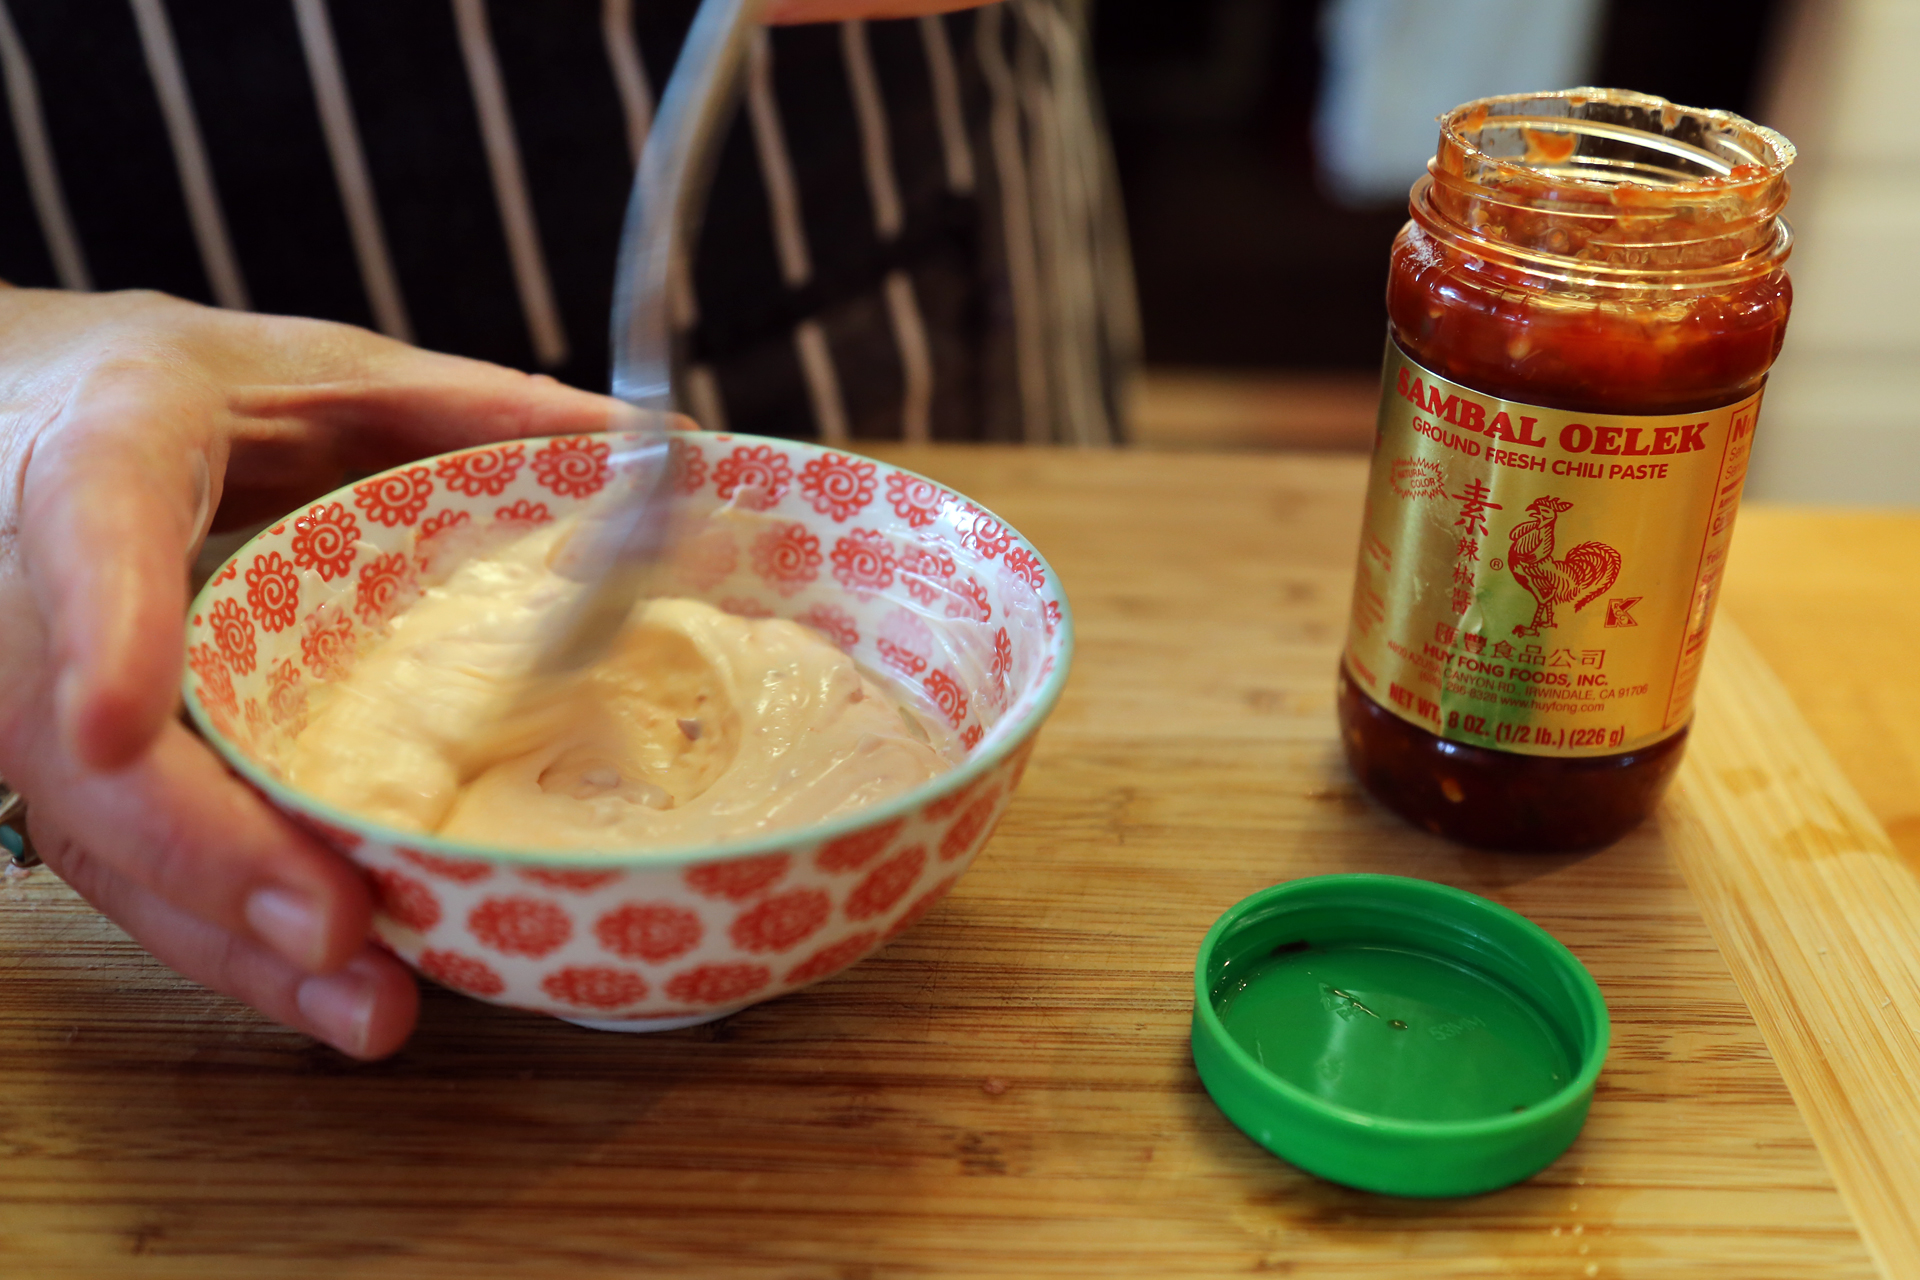 In another bowl, stir together the mayo and sambal oelek; cover and refrigerate.